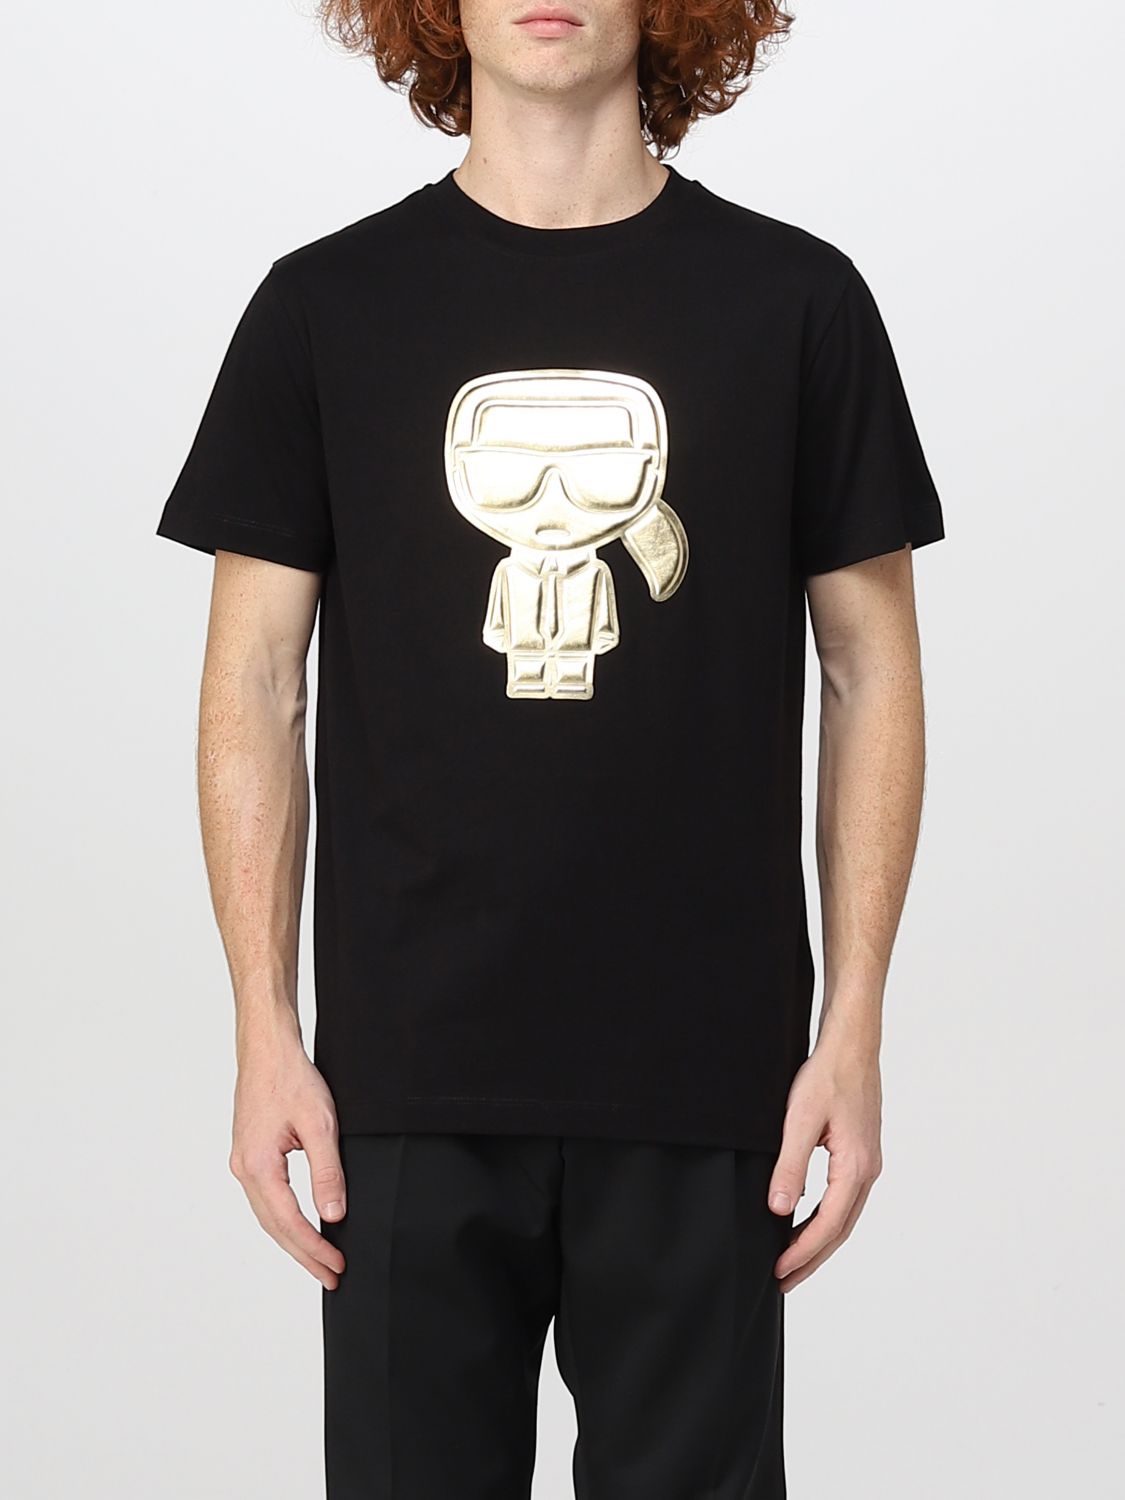 Pef Normaal Kiezelsteen Karl Lagerfeld Outlet: t-shirt for man - Gold | Karl Lagerfeld t-shirt  755064524241 online on GIGLIO.COM